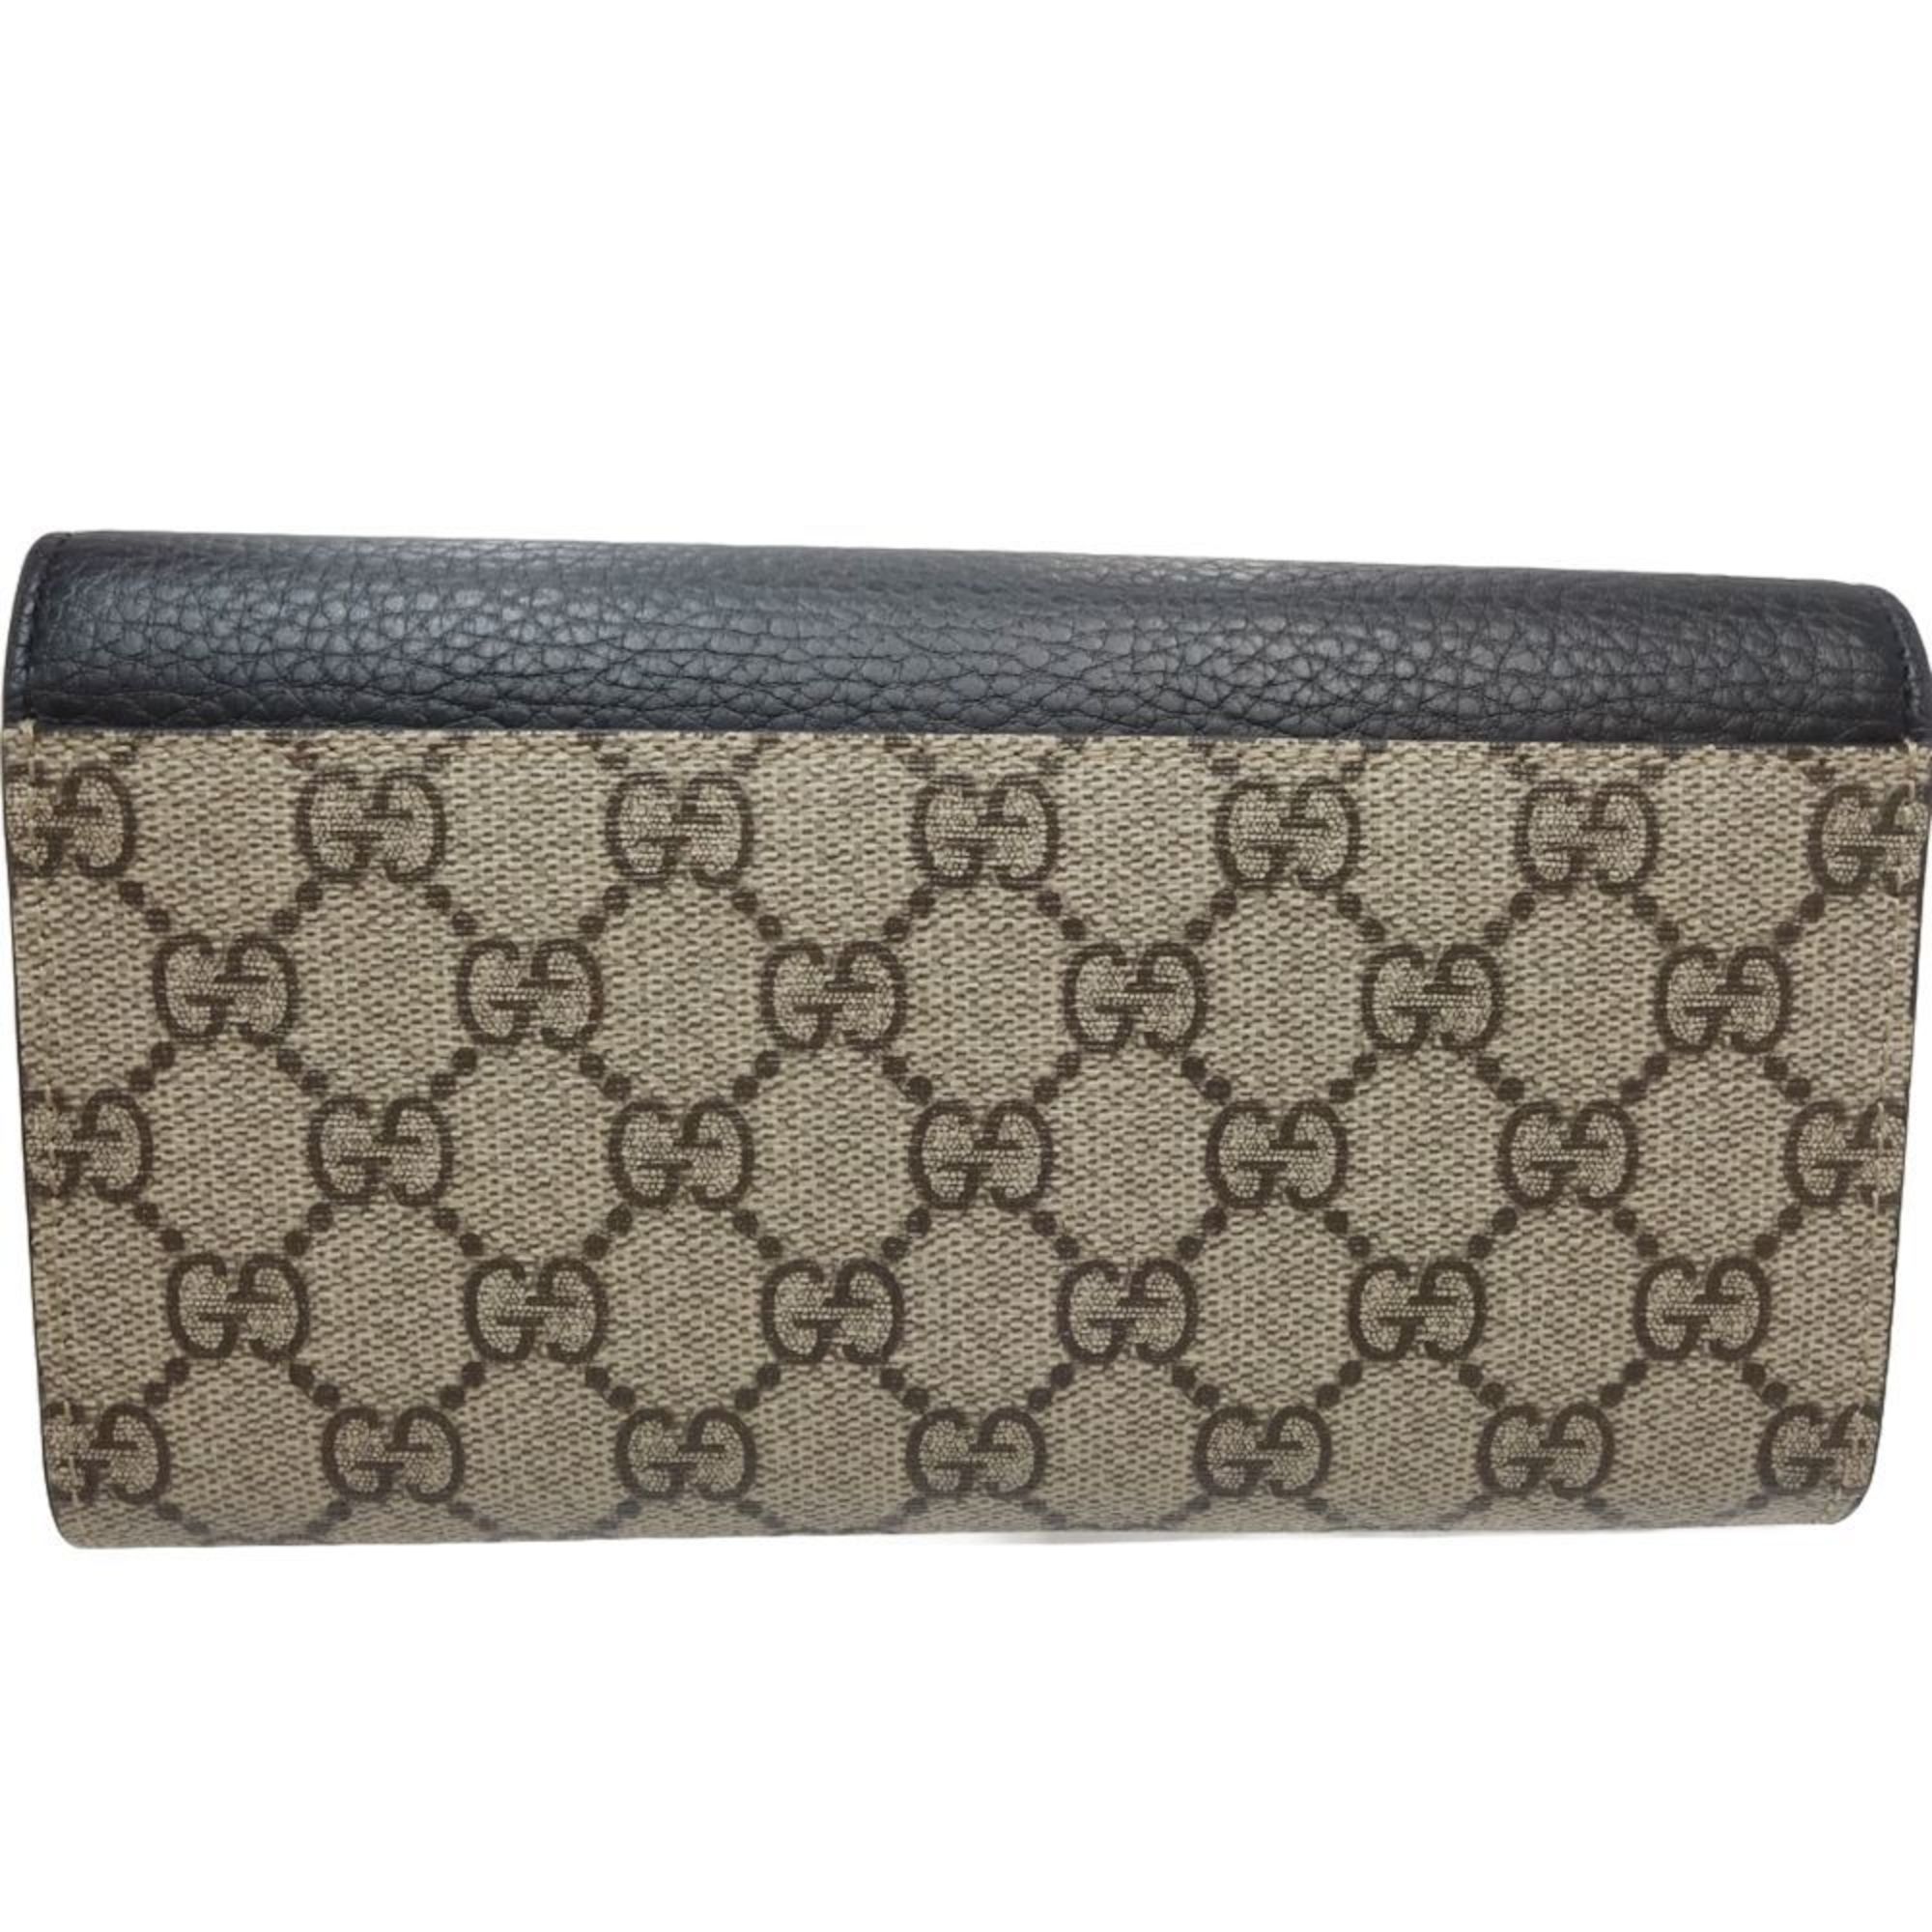 GUCCI GG Marmont Continental Wallet 456116 Long Supreme Canvas x Leather Beige Black 083869